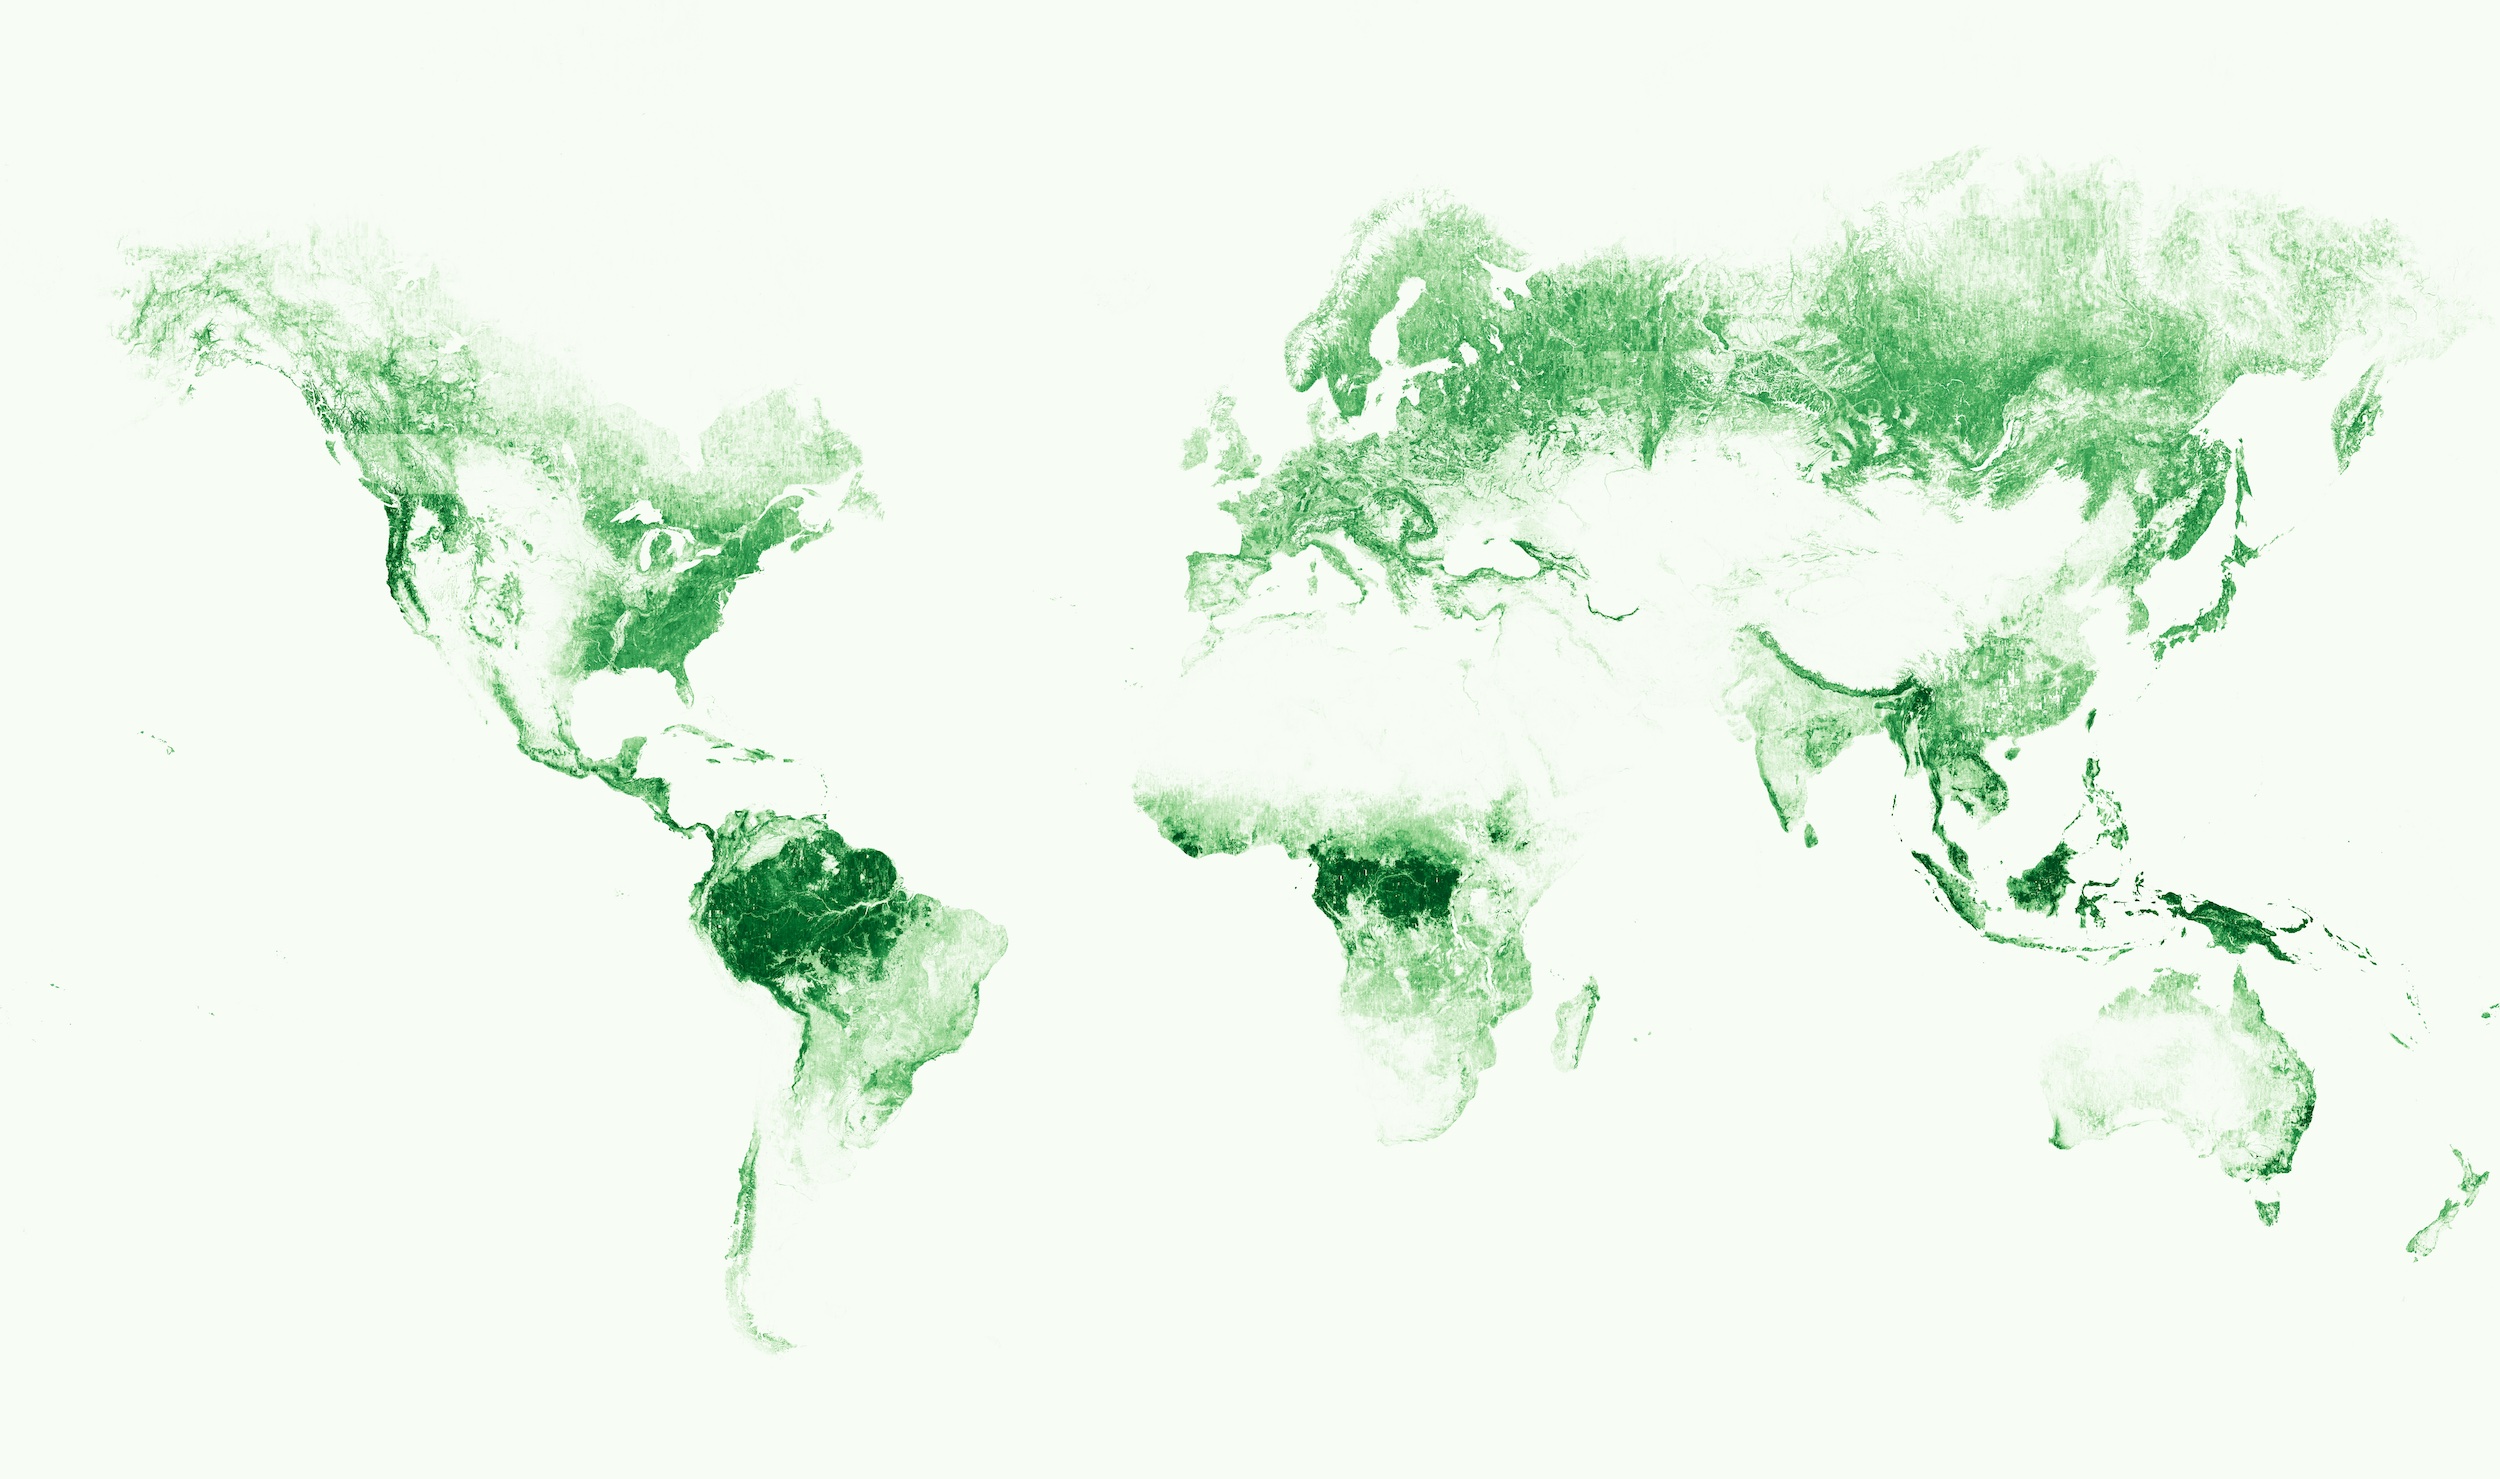 A map of the world’s canopy height obtained from AI models analyzing high resolution satellite imagery.